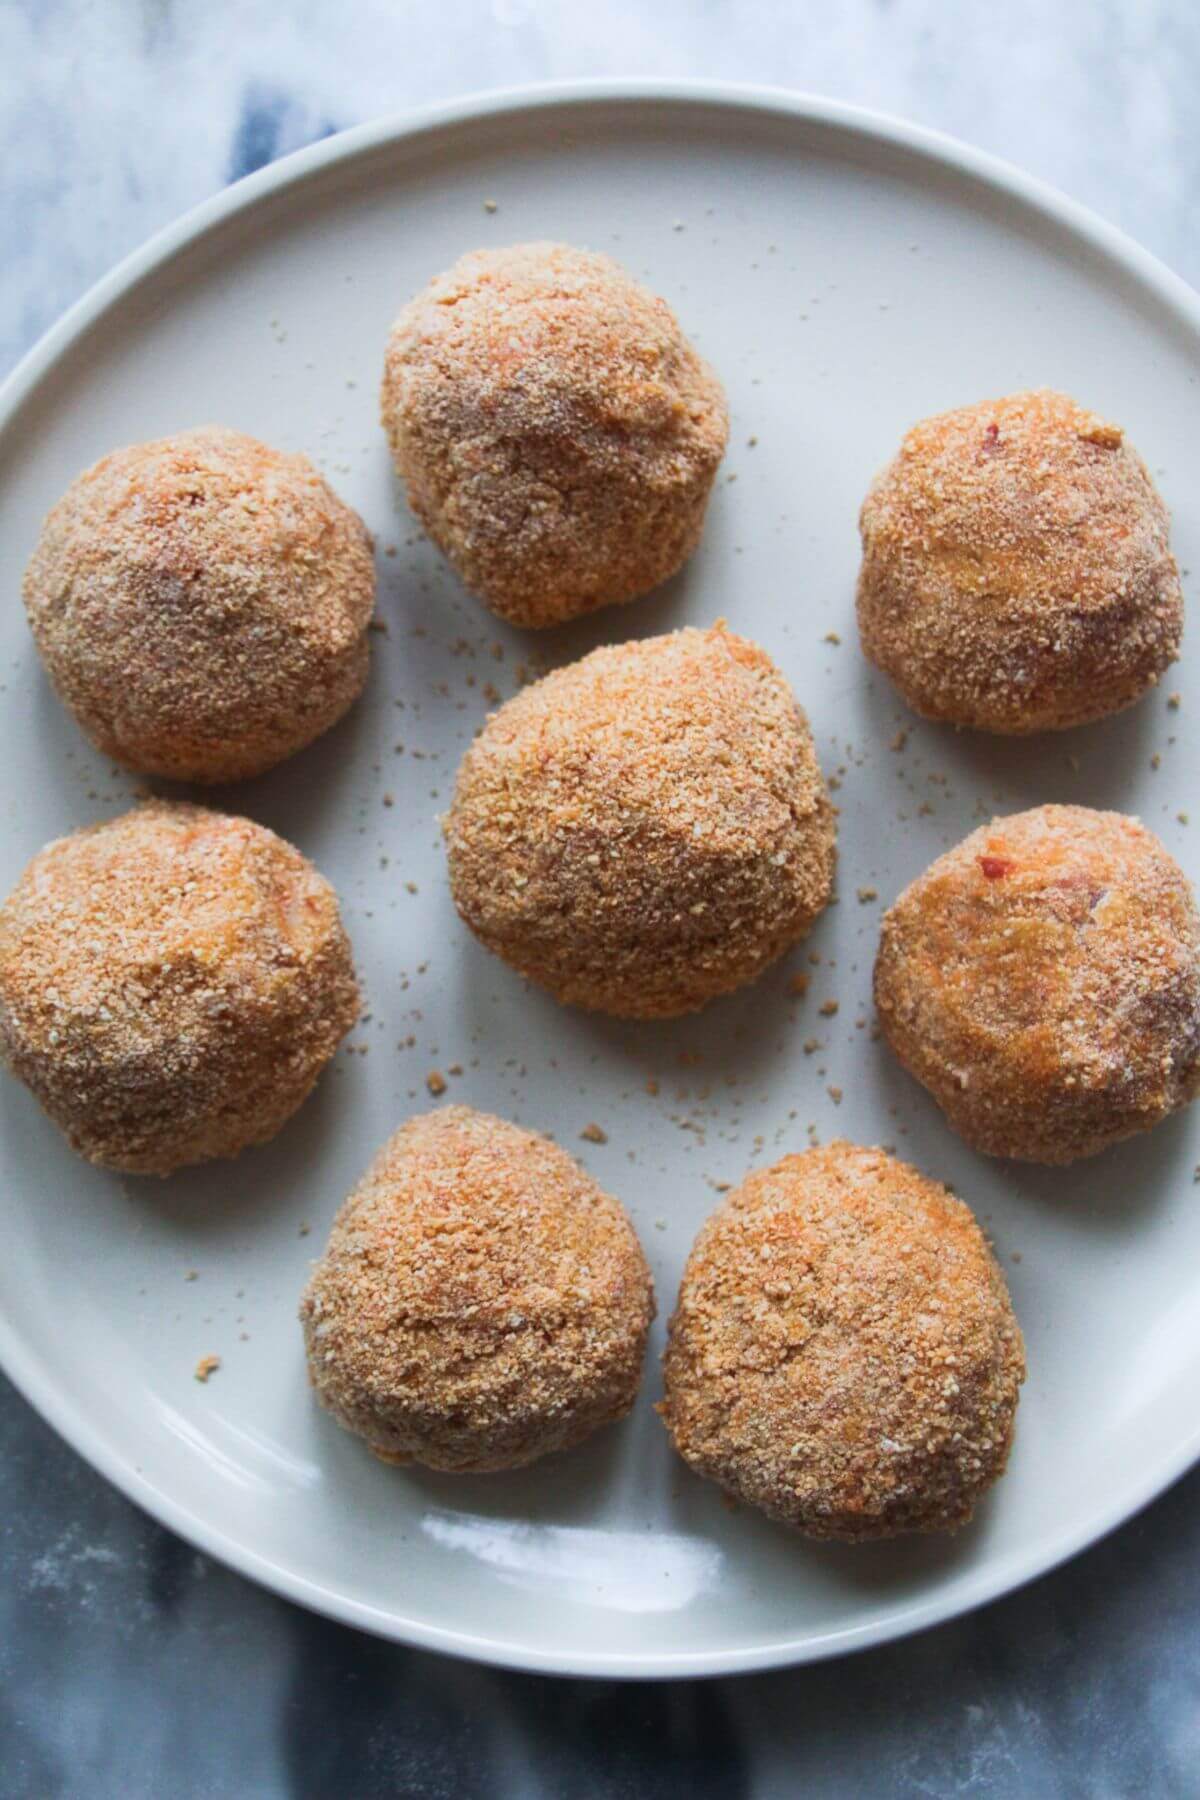 8 coated arancini balls pre frying, on a large white plate.